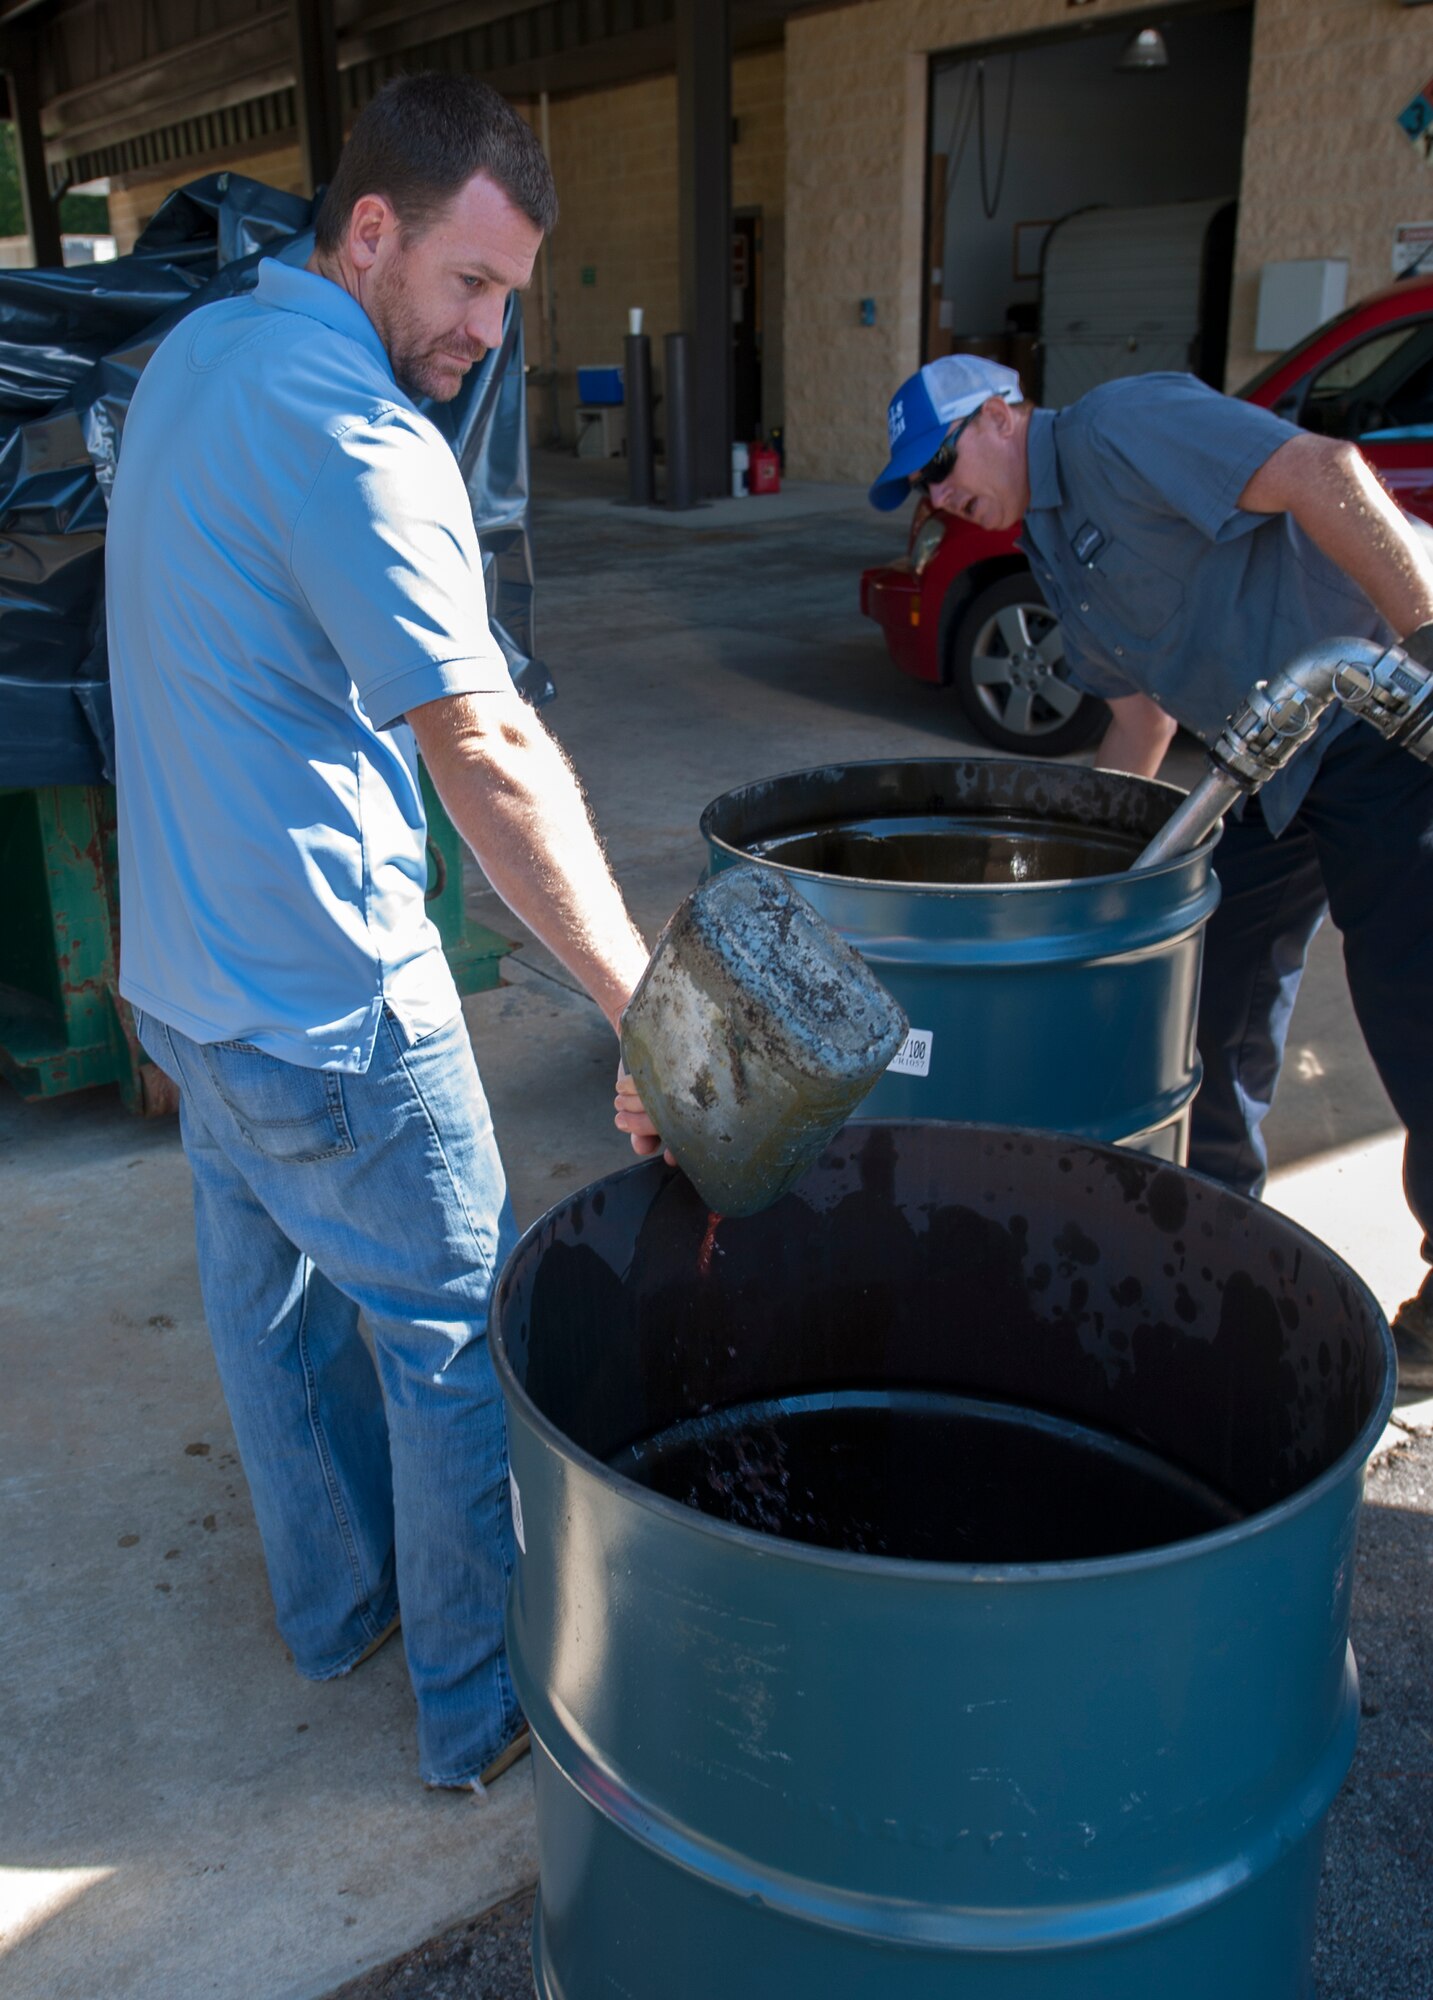 Jonathon Colmer, Hurlburt Field 90-Day Hazardous Waste Collection Facility supervisor, pours used oil into a drum during a Household Hazardous Waste Collection Day at Hurlburt Field, Fla., Oct. 24, 2014. The fluids were transported to a nearby plant to be recycled into reusable fuel. (U.S. Air Force photo/Senior Airman Kentavist P. Brackin)